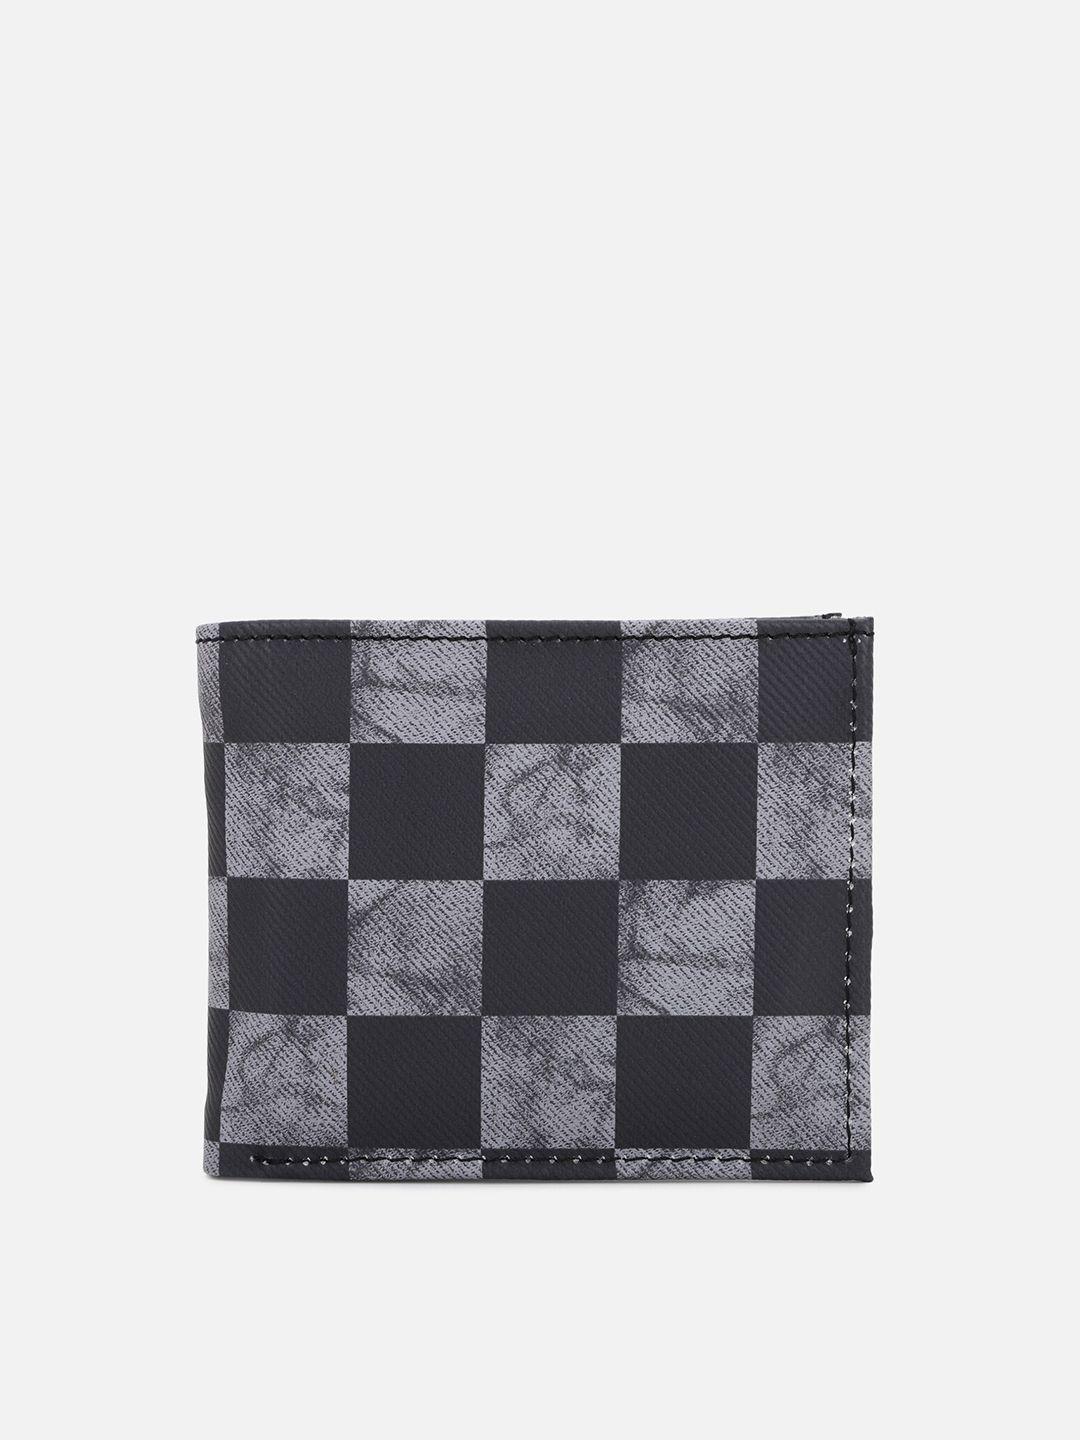 forever-21-men-black-&-grey-checked-pu-two-fold-wallet